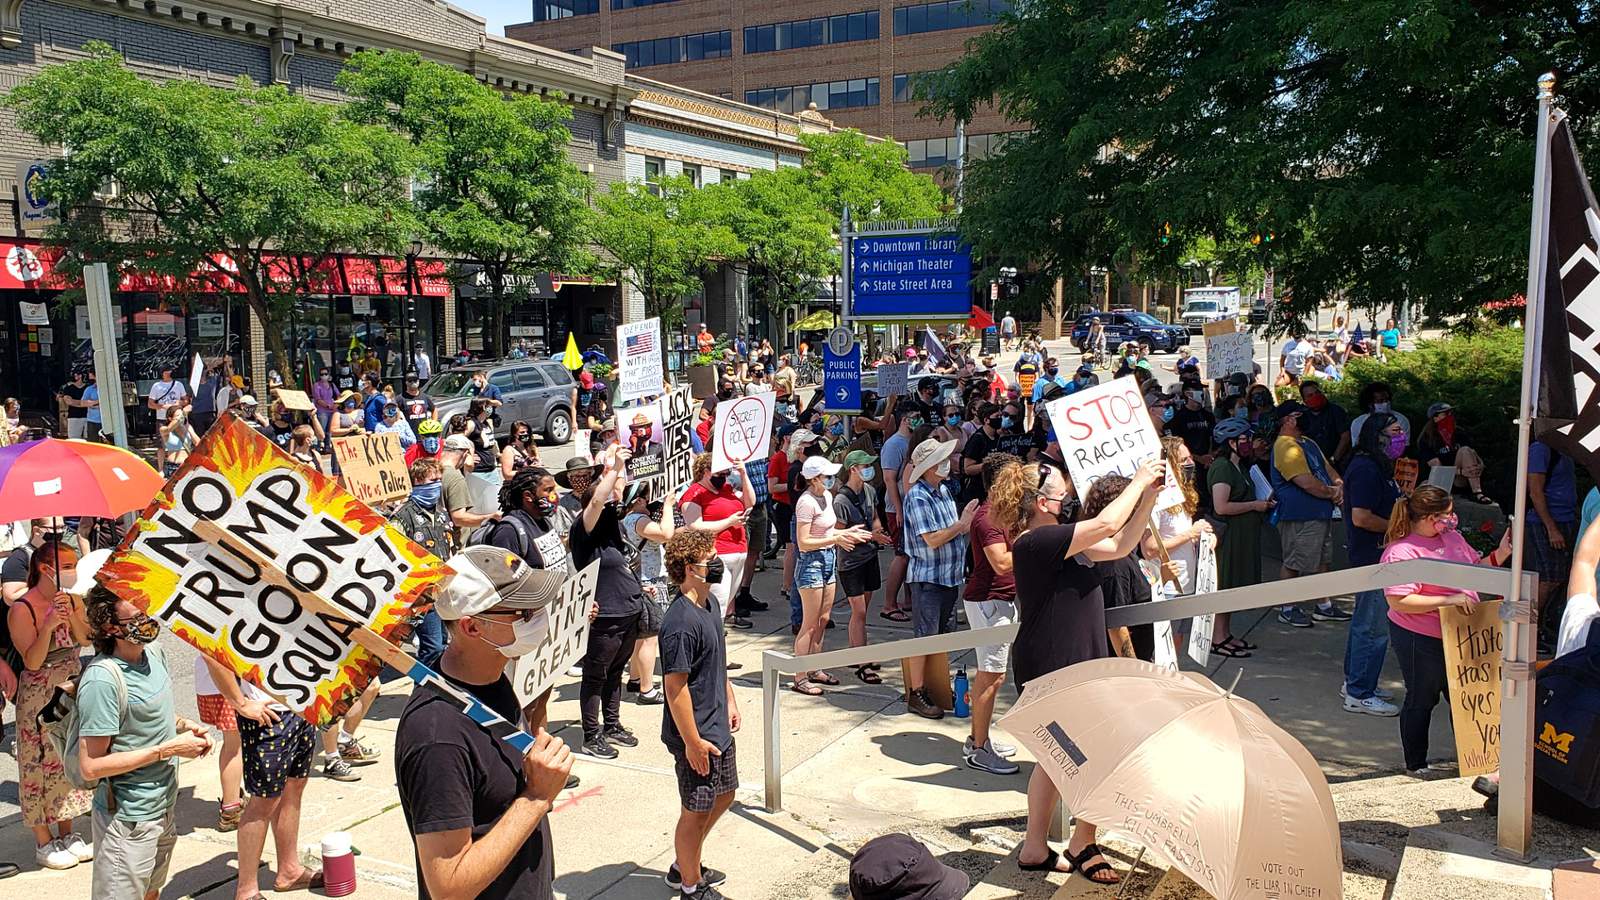 In pictures: Protestors rally in Ann Arbor against police brutality; use of federal agents